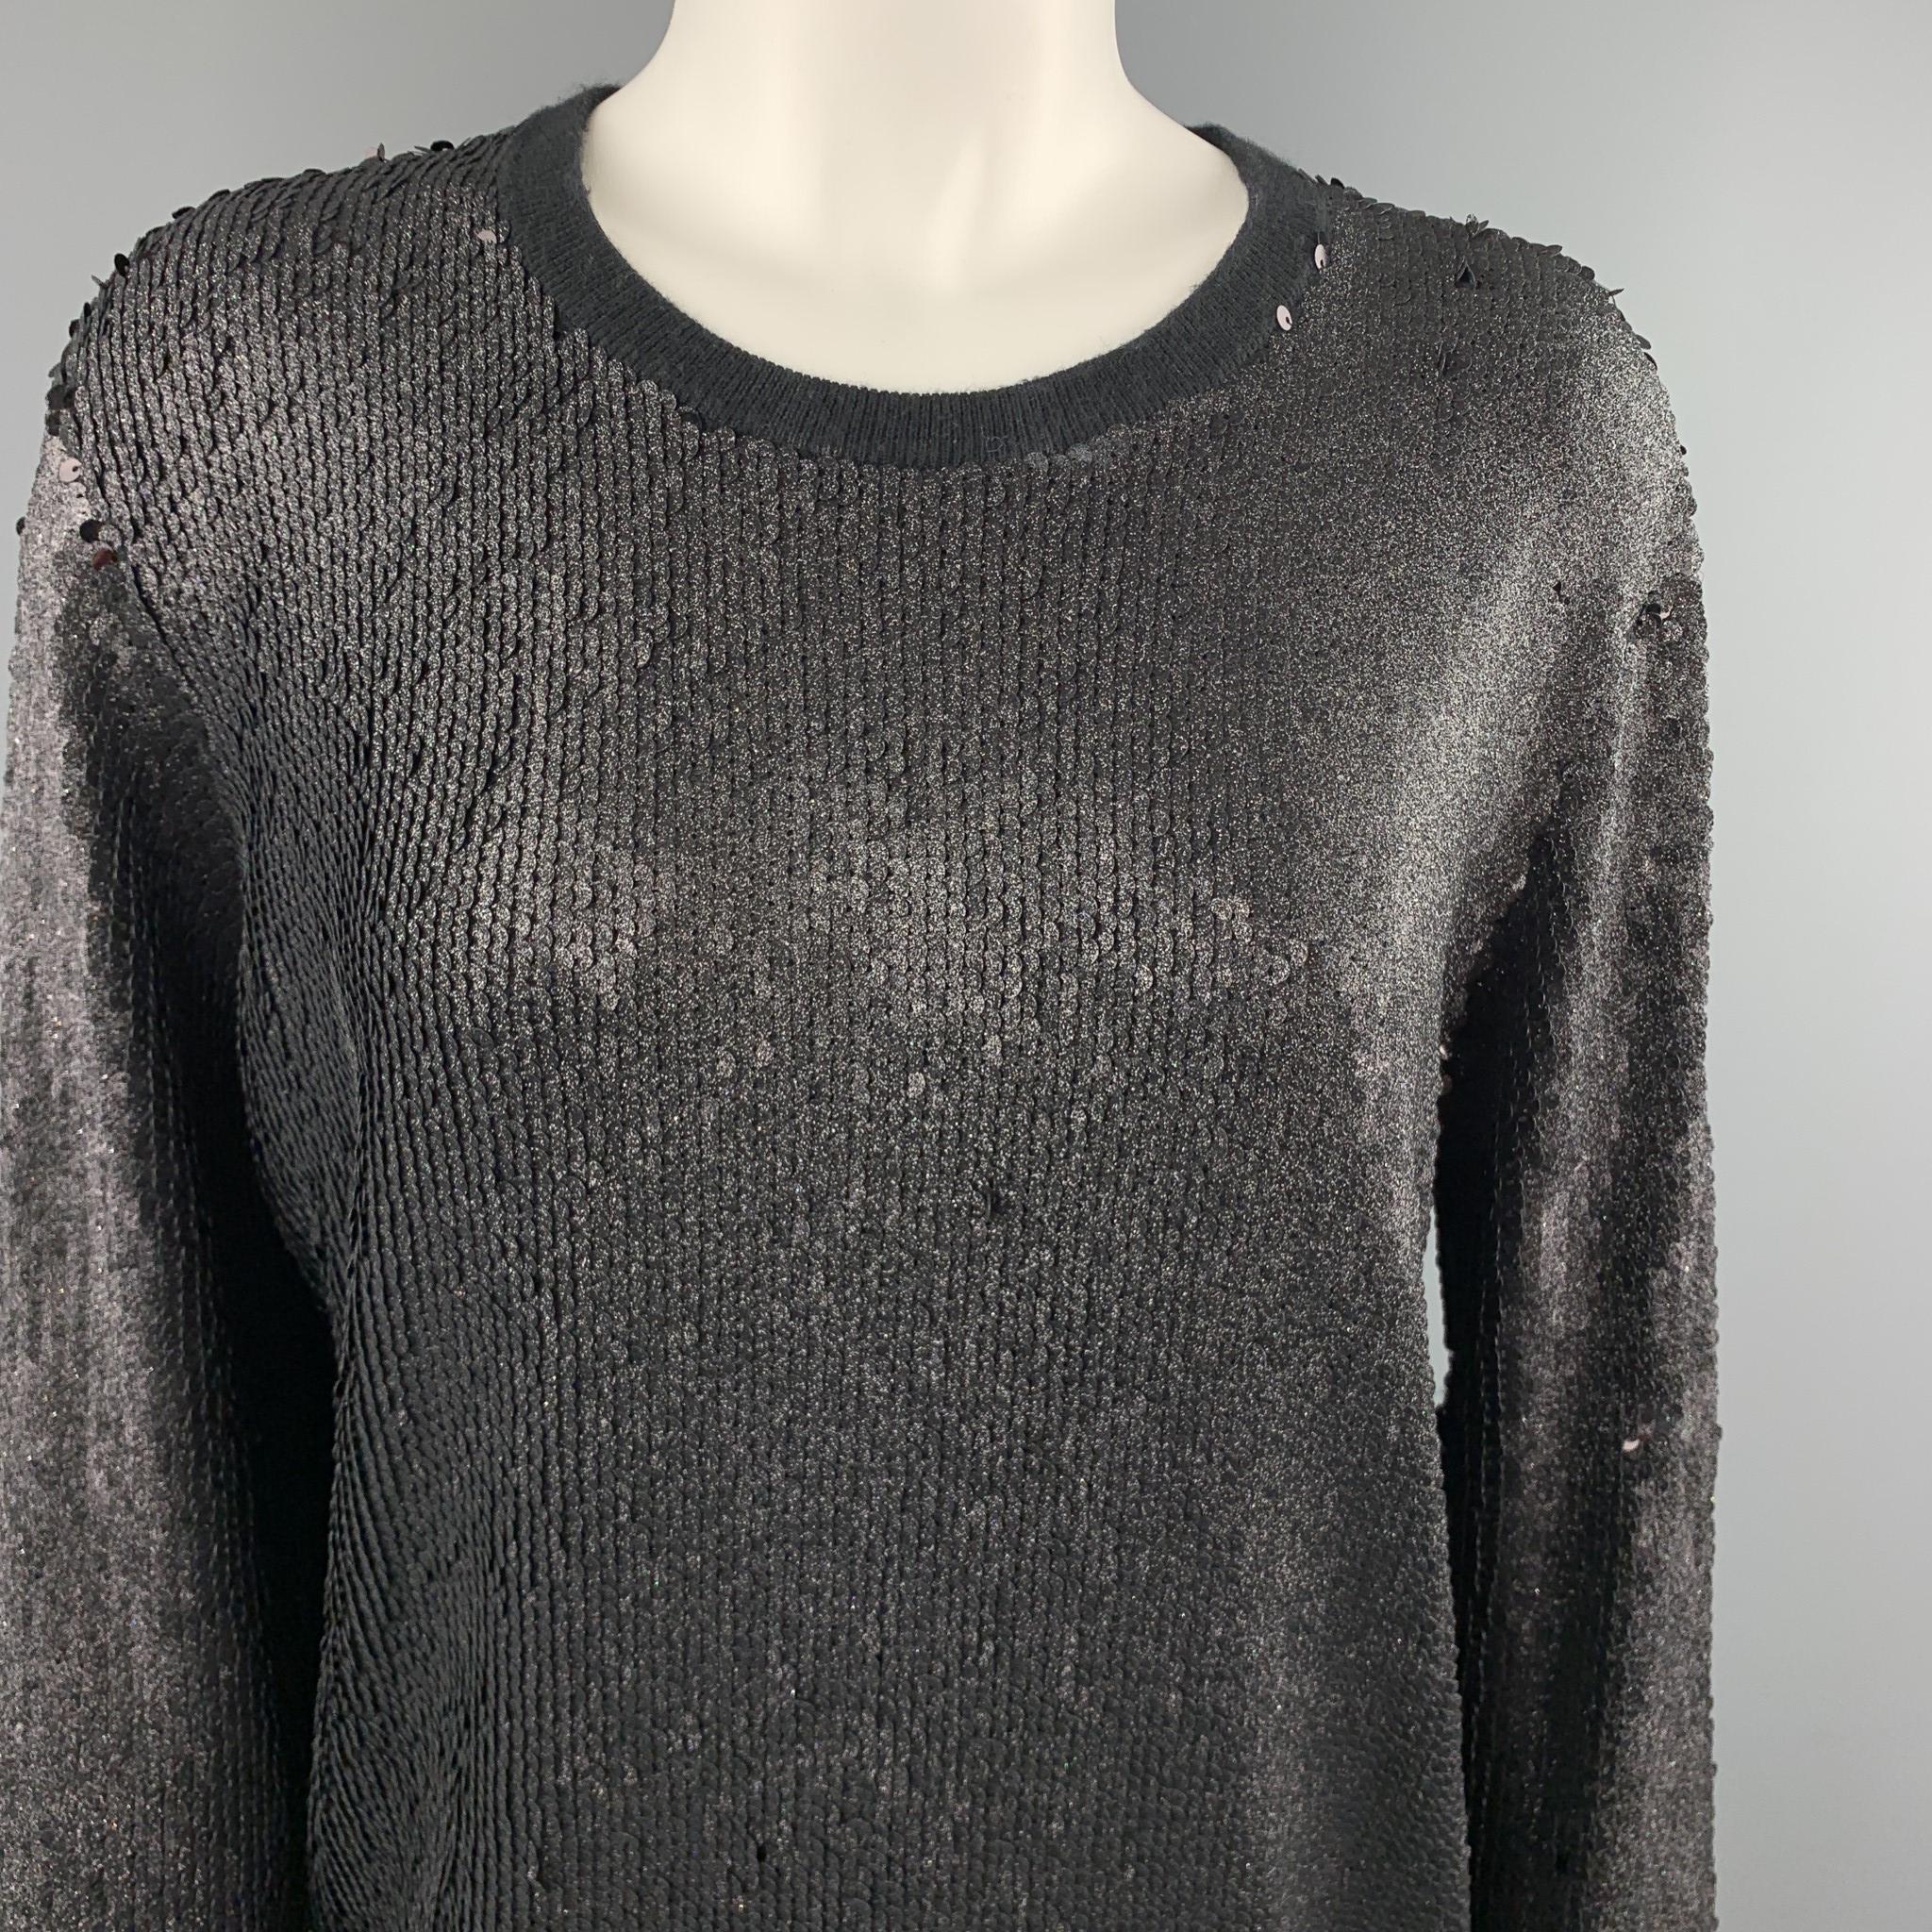 EQUIPMENT FEMME pullover sweater comes in light weight viscose blend knit with a crewneck and all over sparkle sequin. 

Very Good Pre-Owned Condition.
Marked: S

Measurements:

Shoulder: 16 in.
Chest: 40 in.
Sleeve: 28 in.
Length: 27 in.